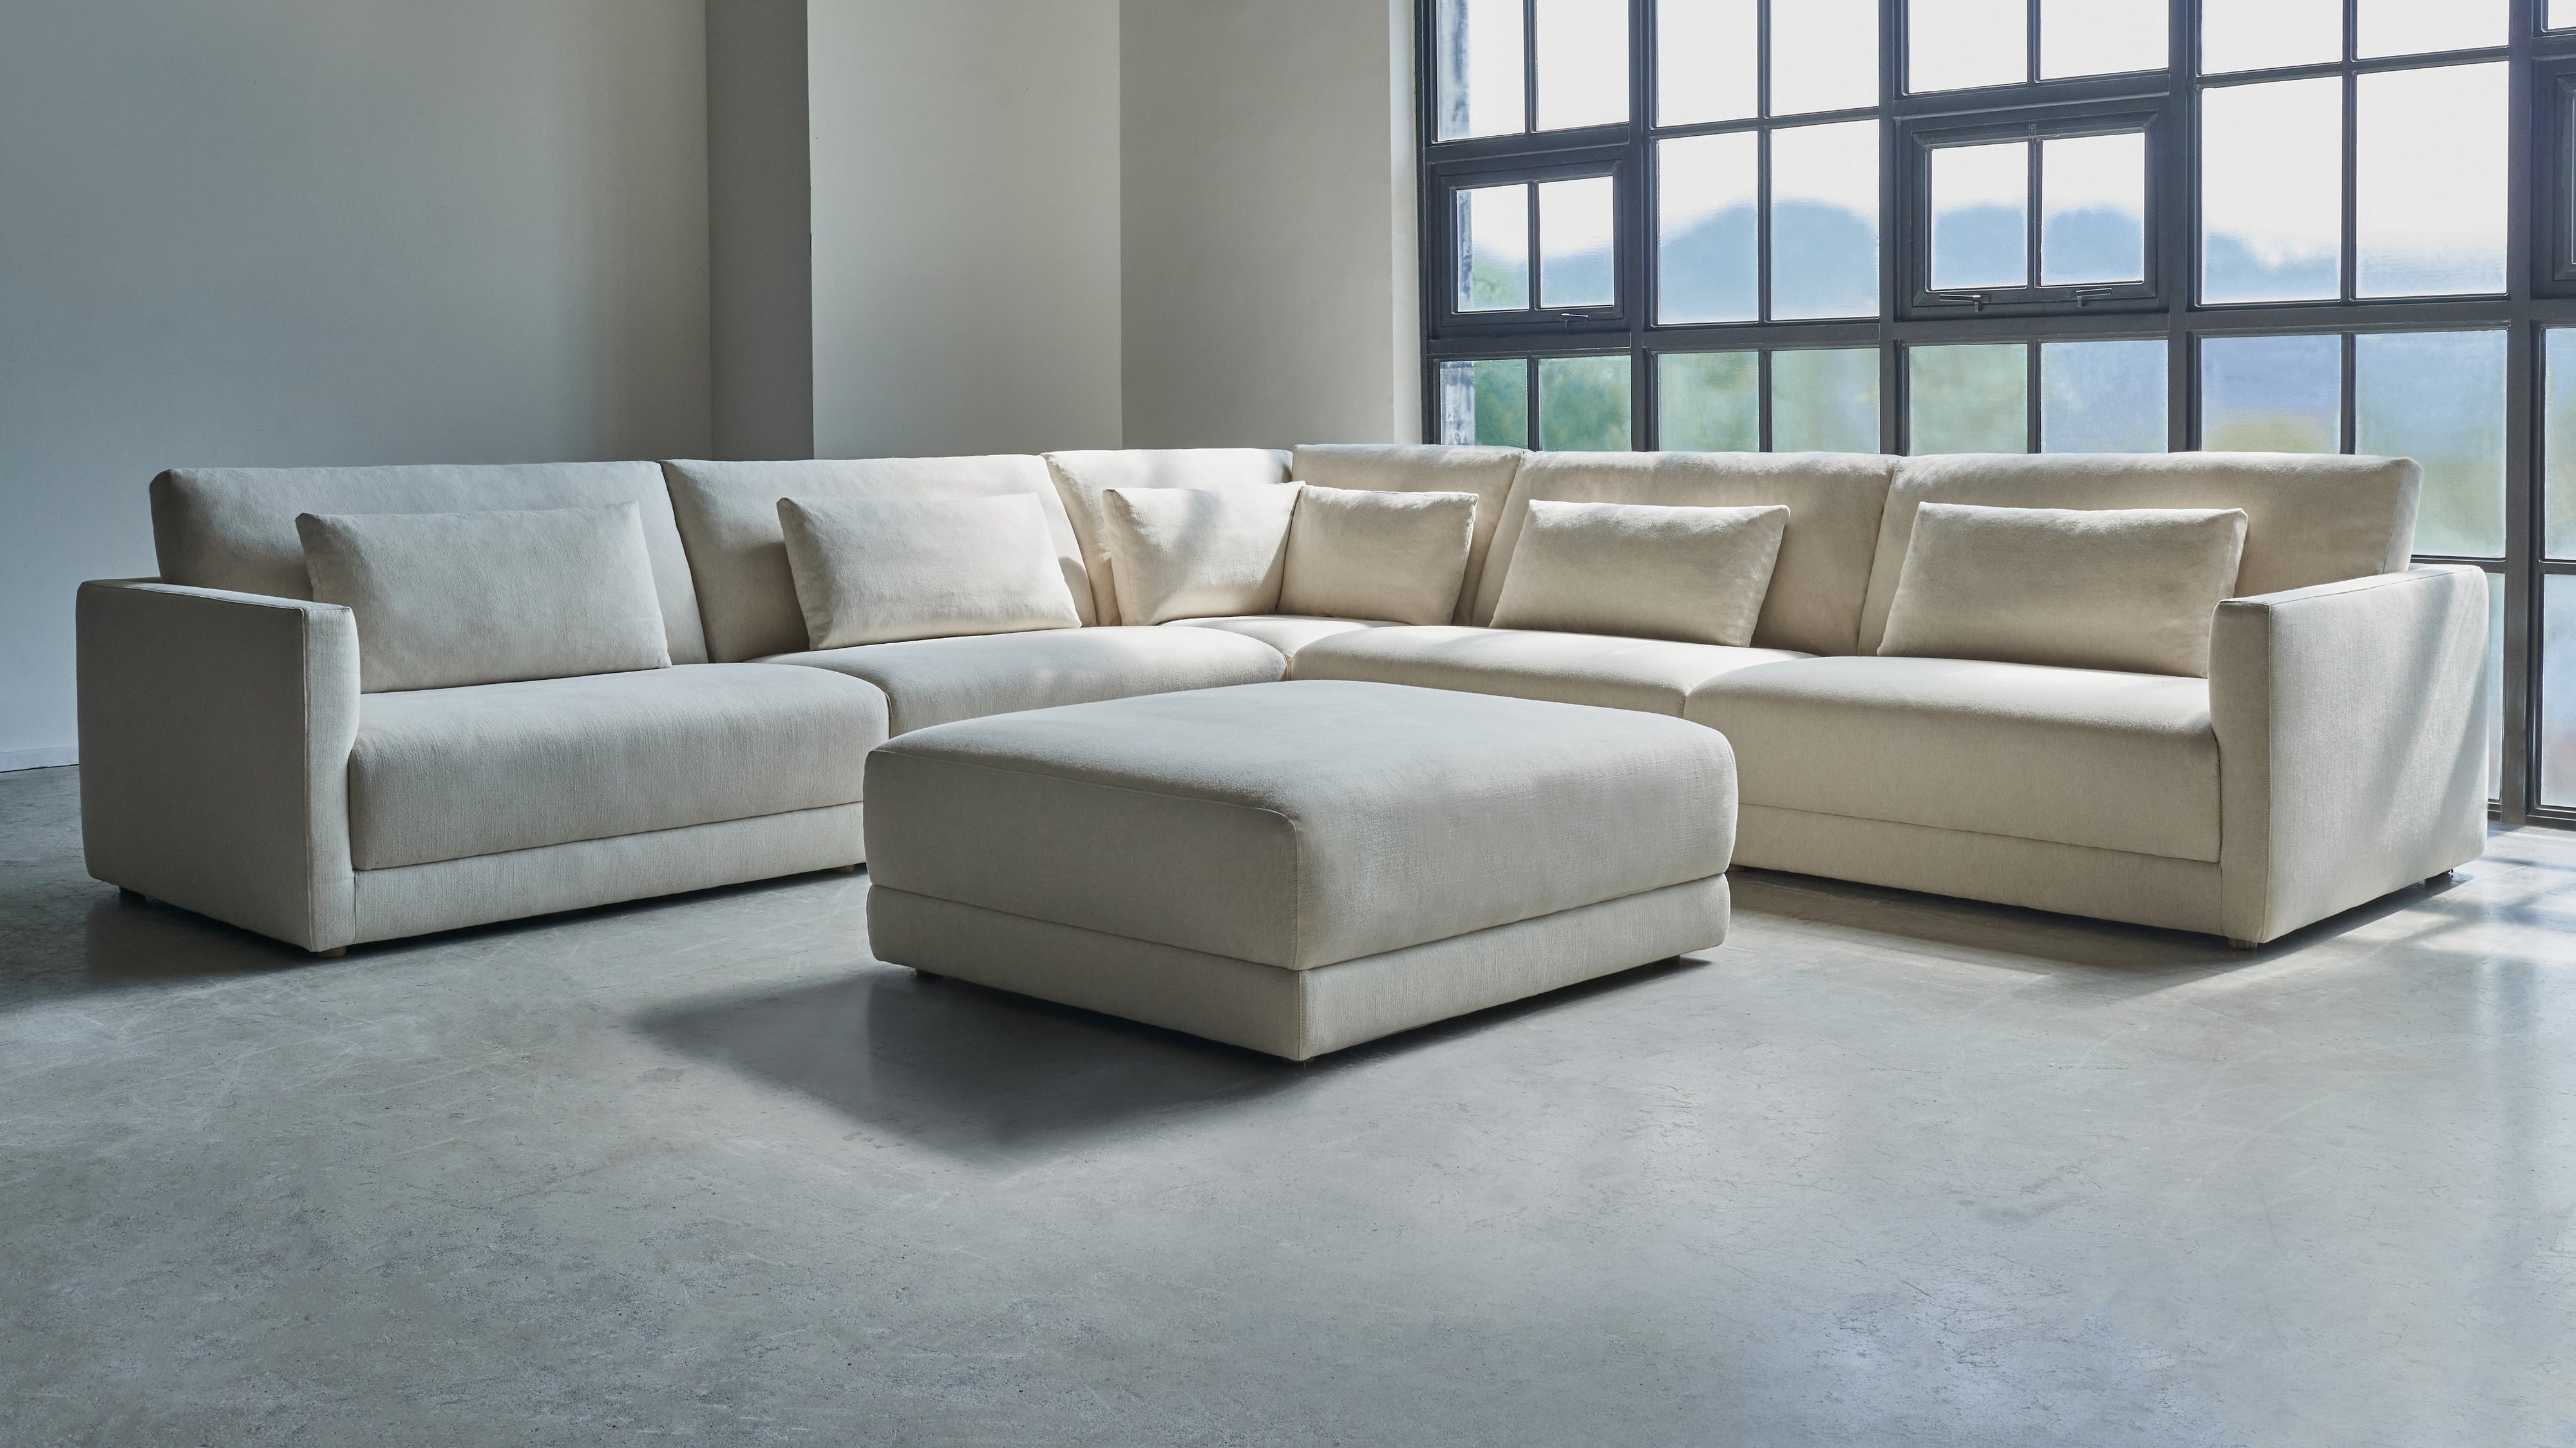 Wind Down 5-Piece Modular Sectional Closed, Beach - Image 9